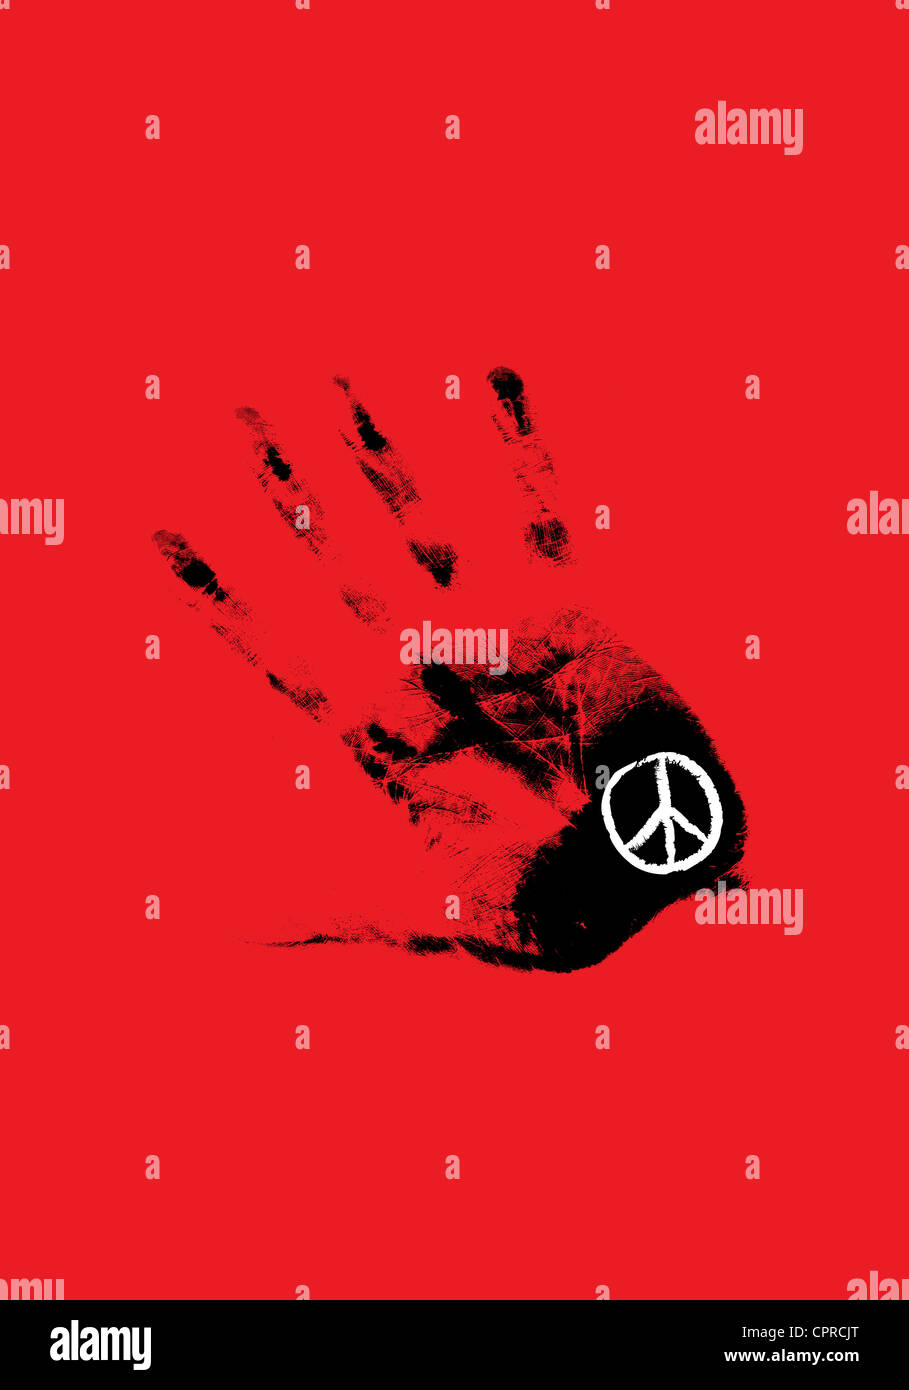 Black handprint with a white Symbol of peace. Stock Photo